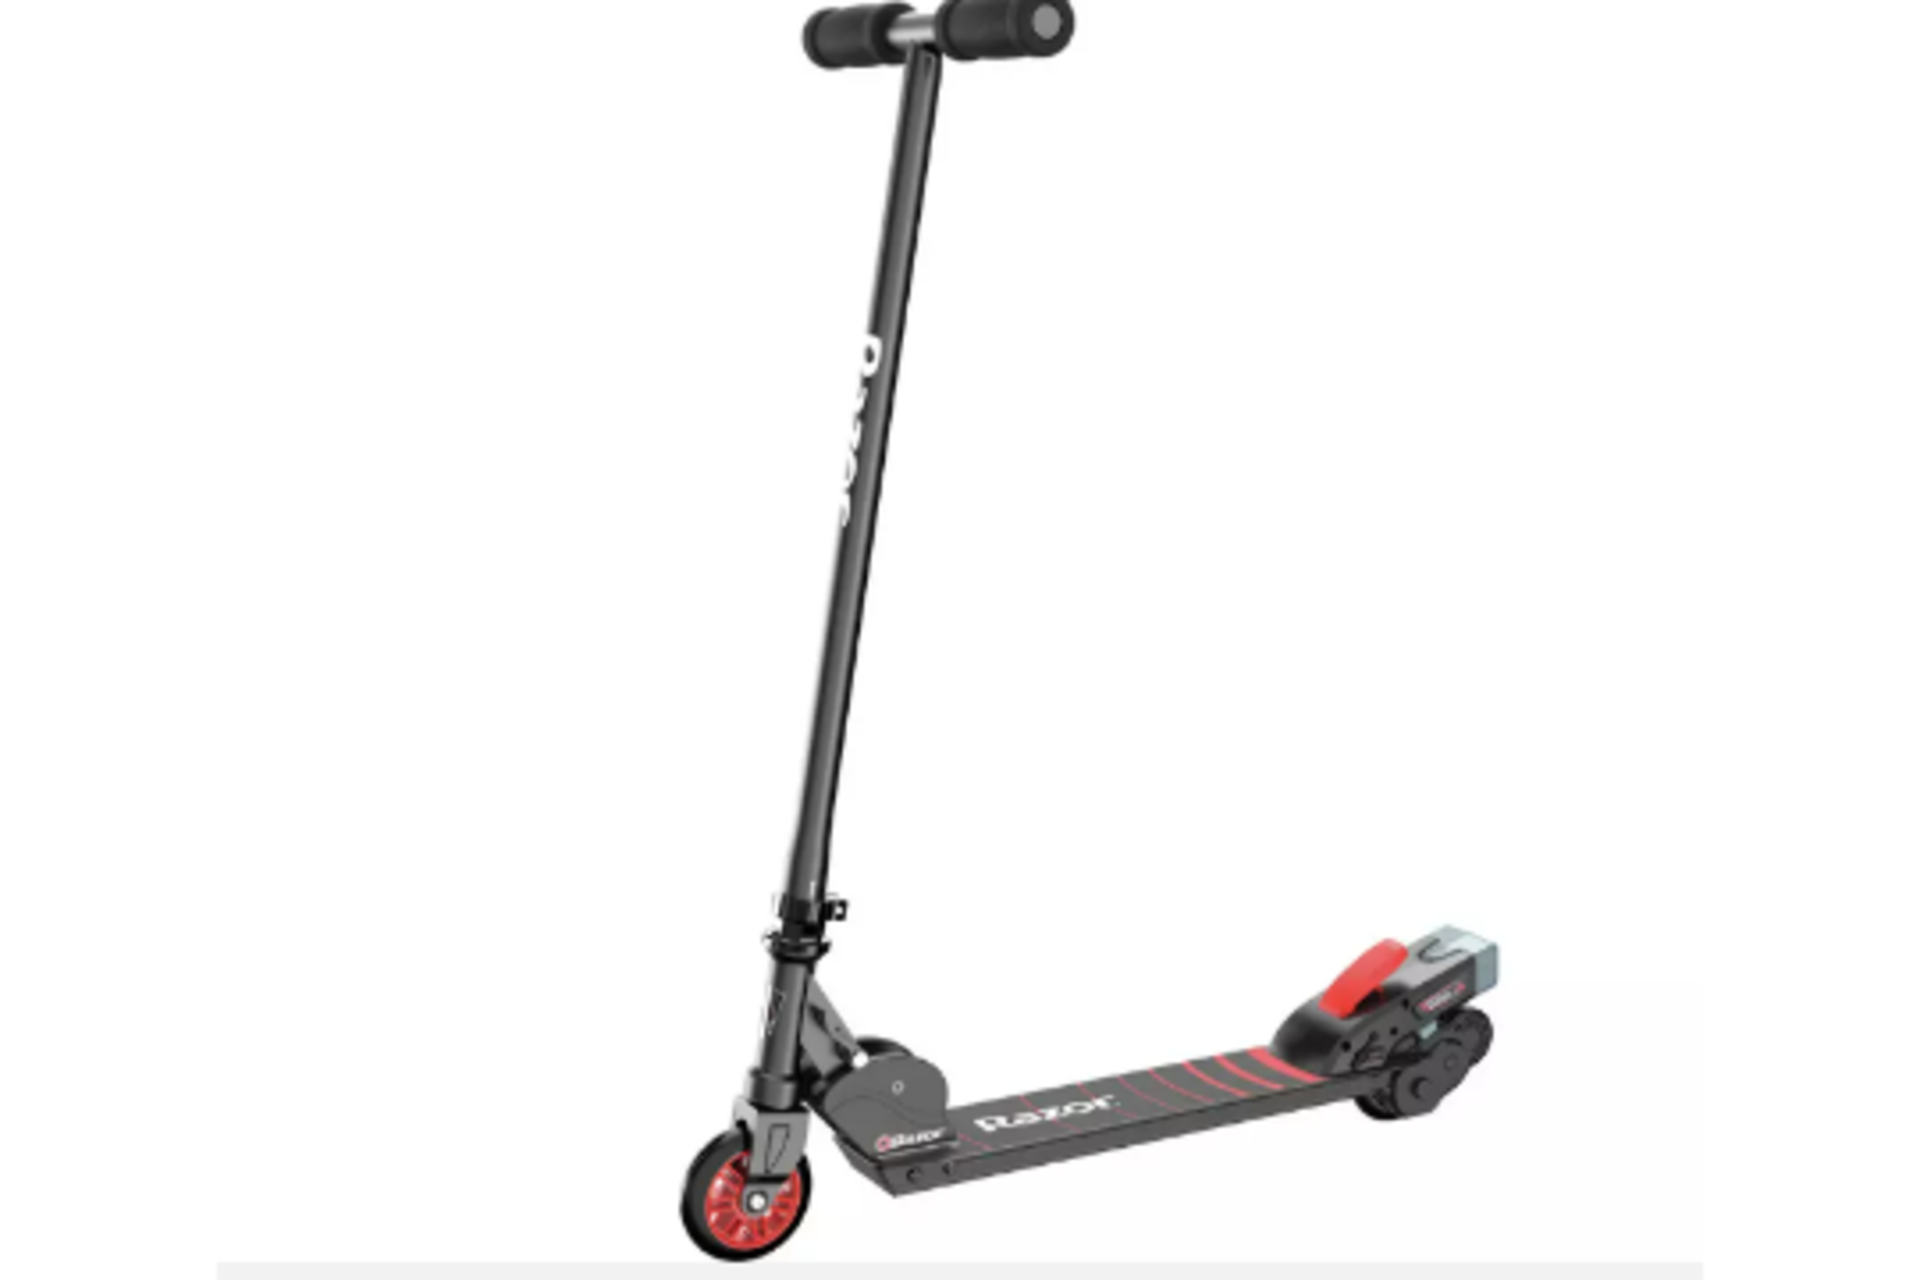 (ex16) Razor Turbo A Black Label Electric Scooter RRP £175.00. Simply step on and kick off to